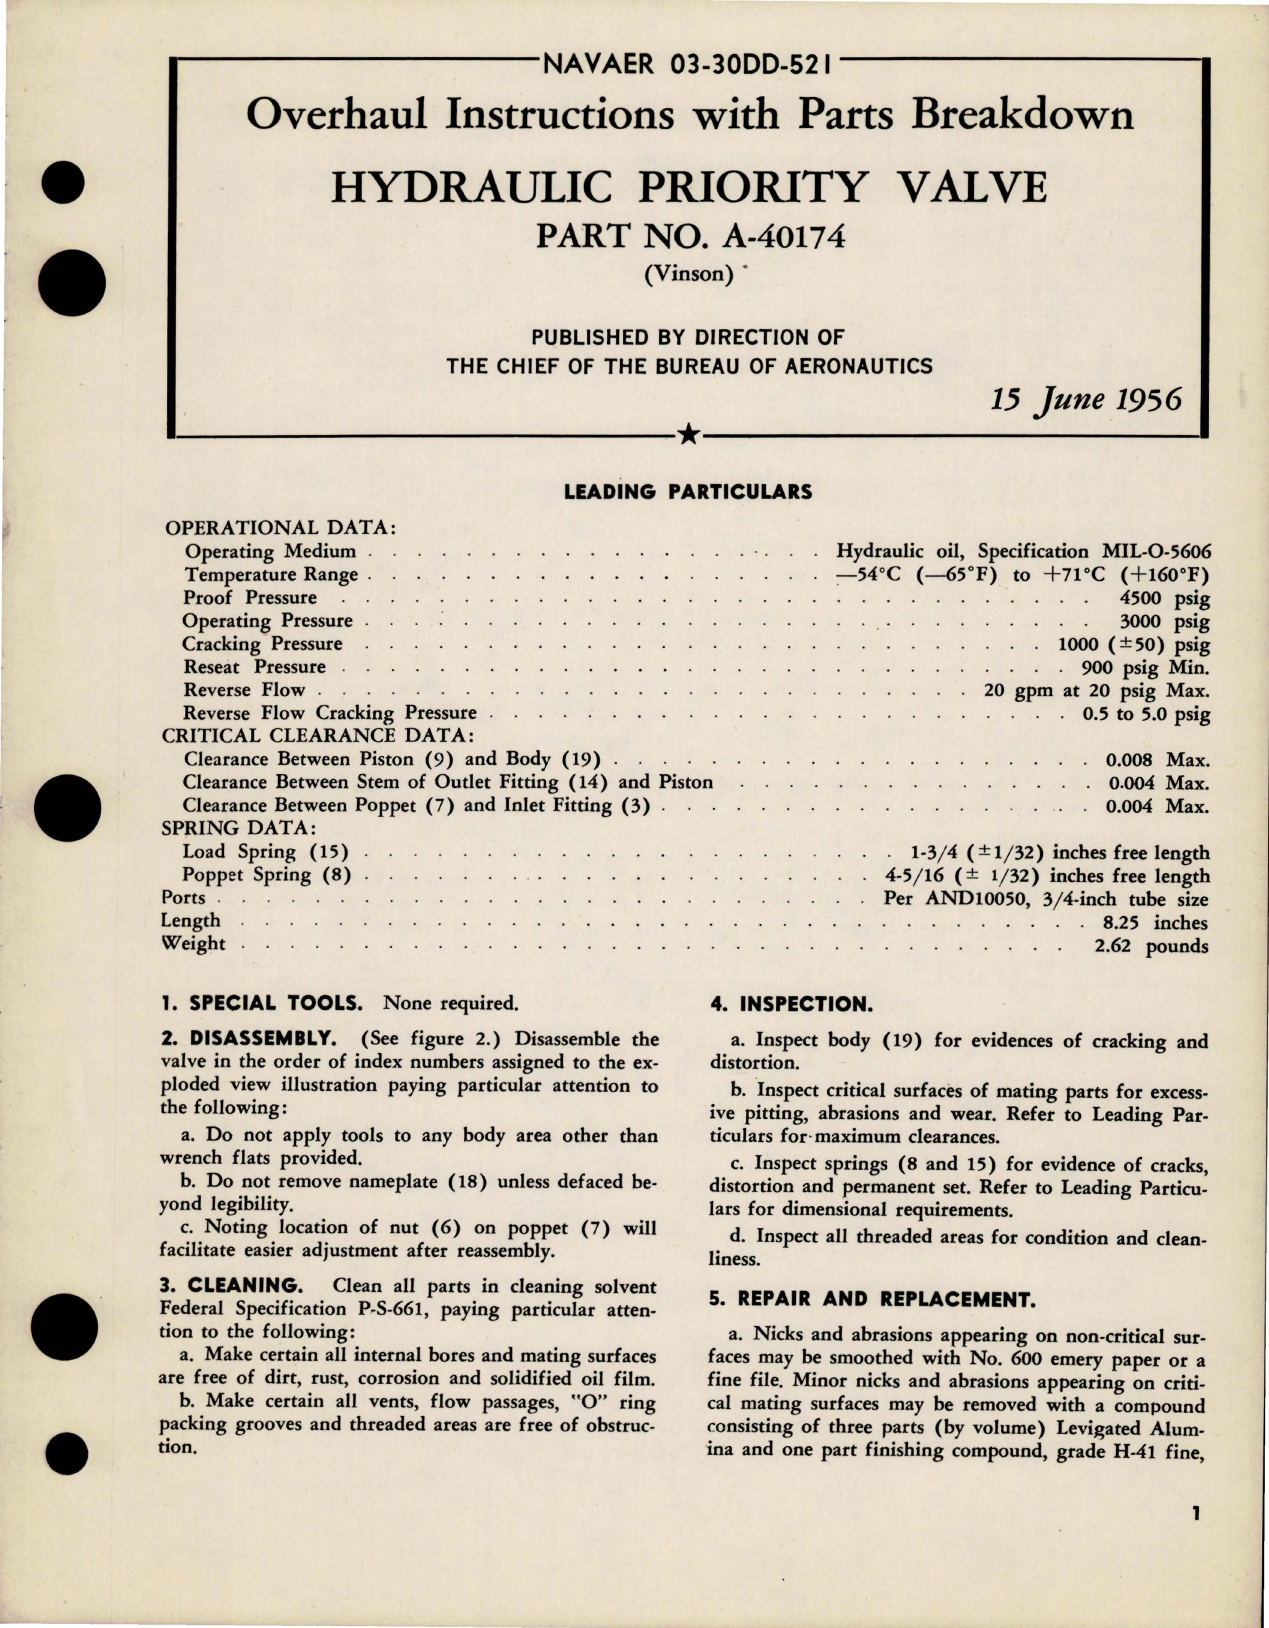 Sample page 1 from AirCorps Library document: Overhaul Instructions with Parts Breakdown for Hydraulic Priority Valve - Part A-40174 